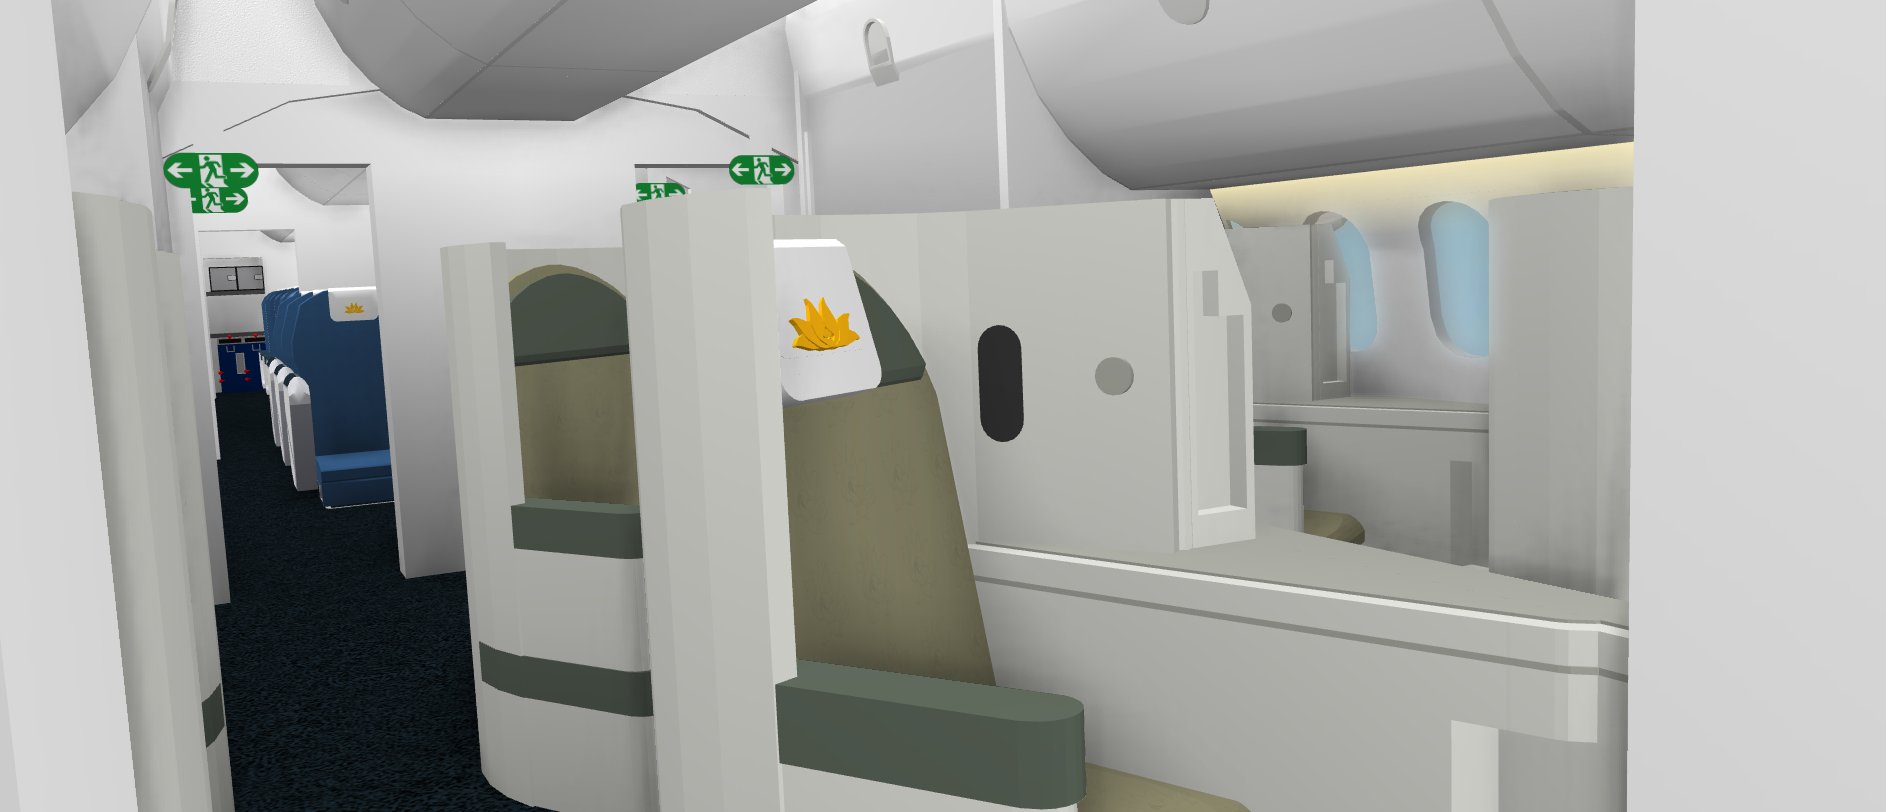 Roblox Vietnam Airlines On Twitter The 787 Is Now Completed Guess You Ll Just Have To Come To A Flight One Day To Experience It All For Yourself Roblox Robloxdev Cuddlesag Rblx 6 Business - turkish airlines roblox в twitter save the date roblox